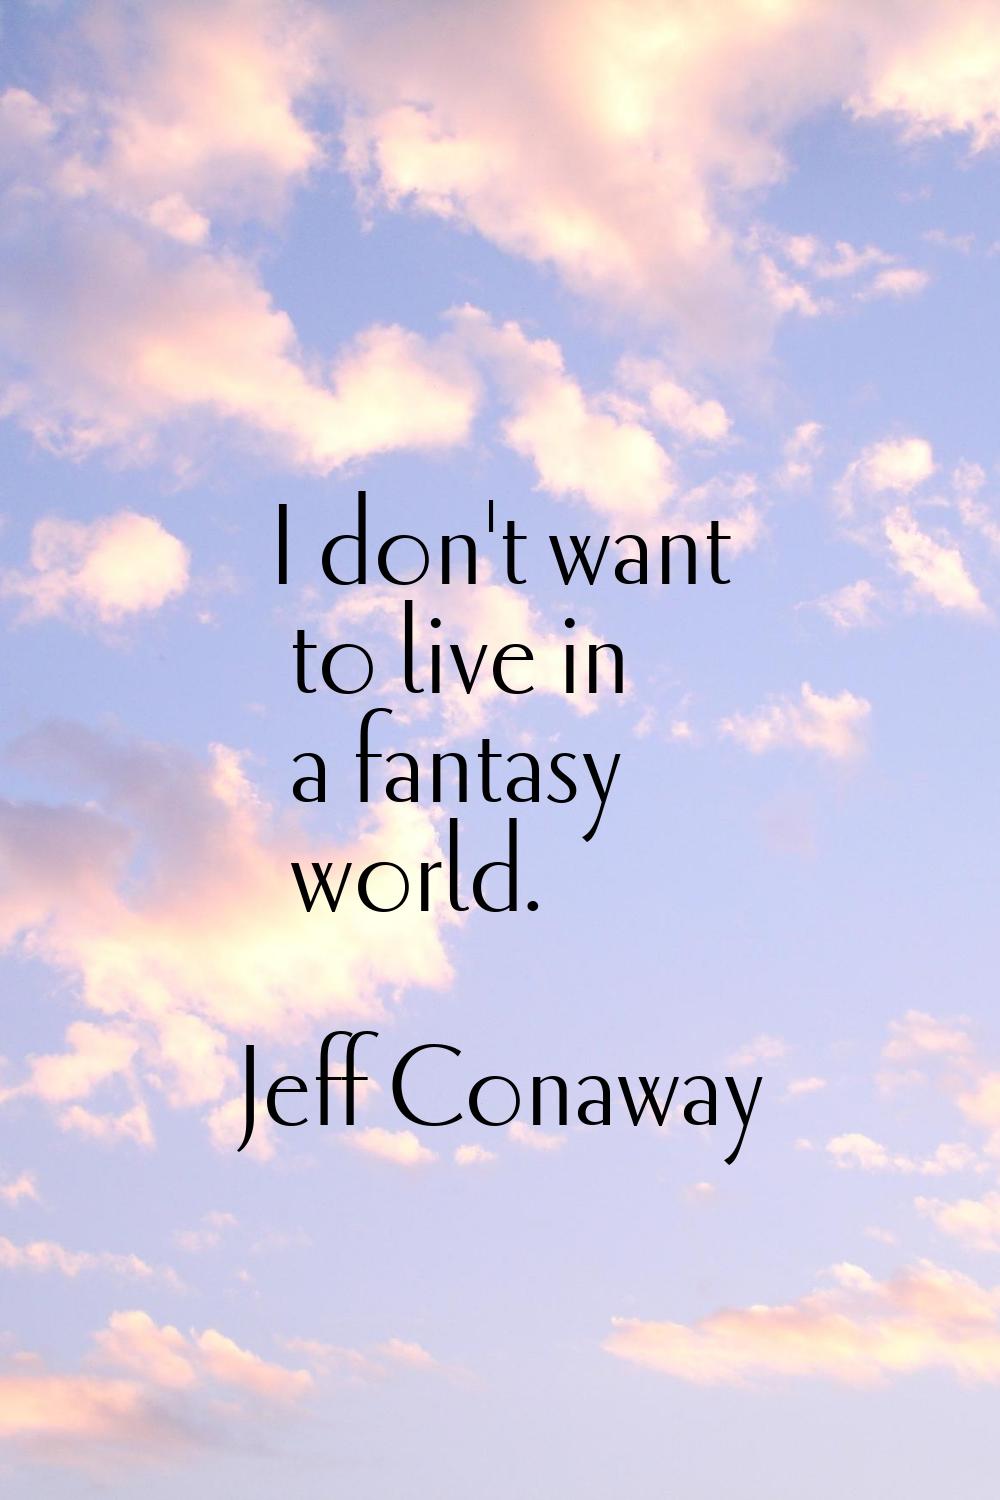 I don't want to live in a fantasy world.